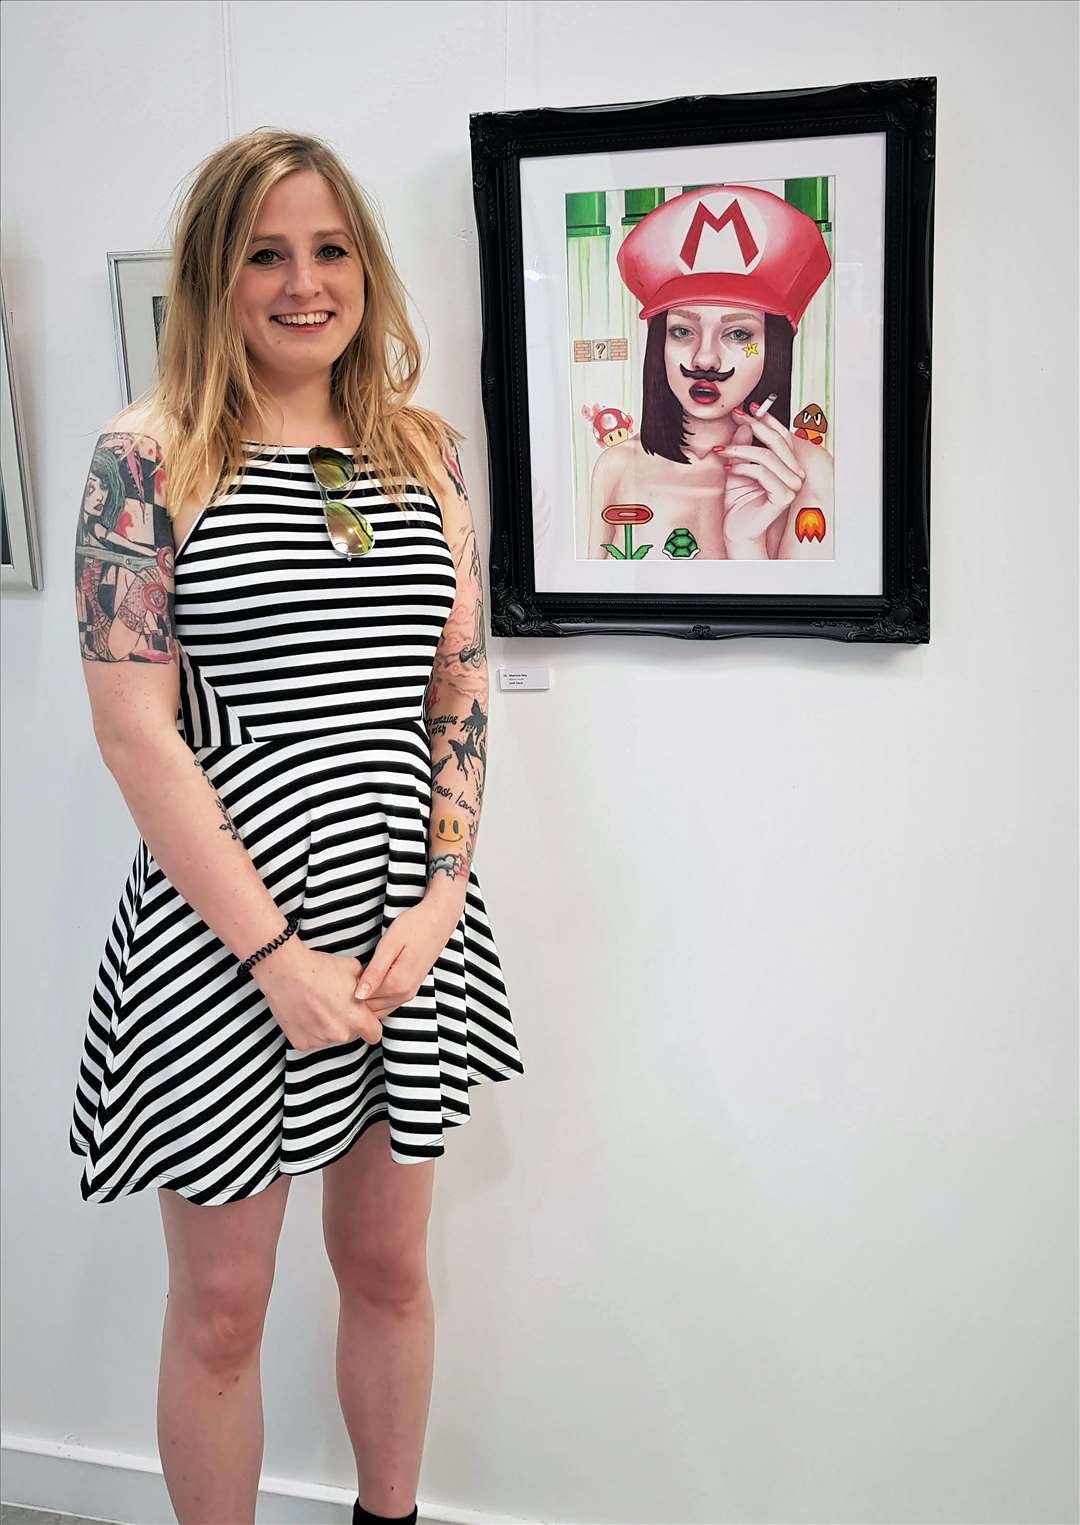 Leah with one of her artworks.